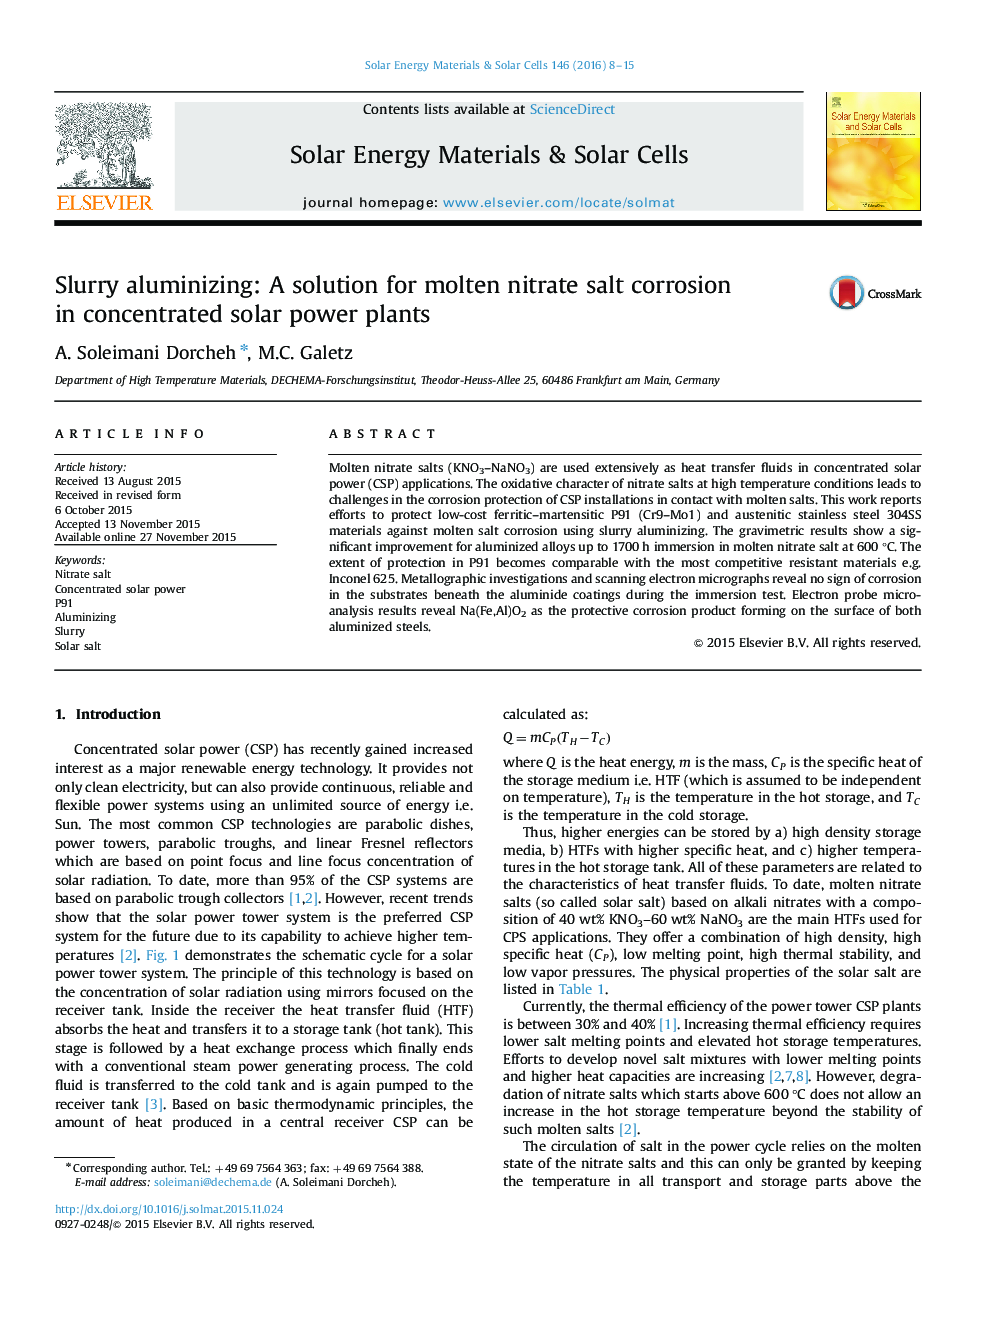 Slurry aluminizing: A solution for molten nitrate salt corrosion in concentrated solar power plants